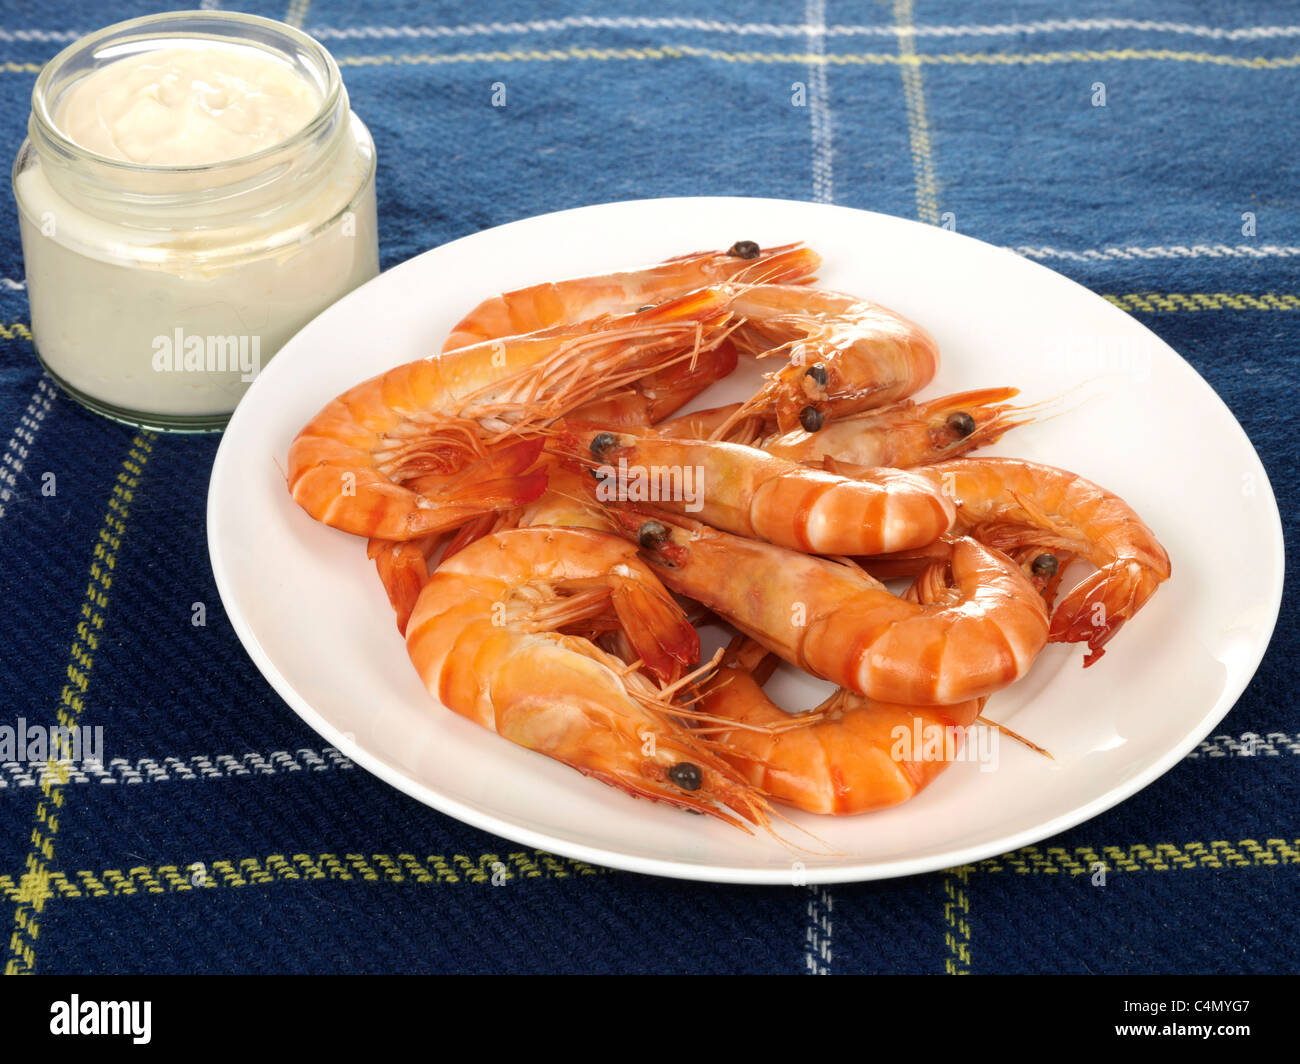 Cooked King Prawns In Shells High Resolution Stock Photography And Images Alamy